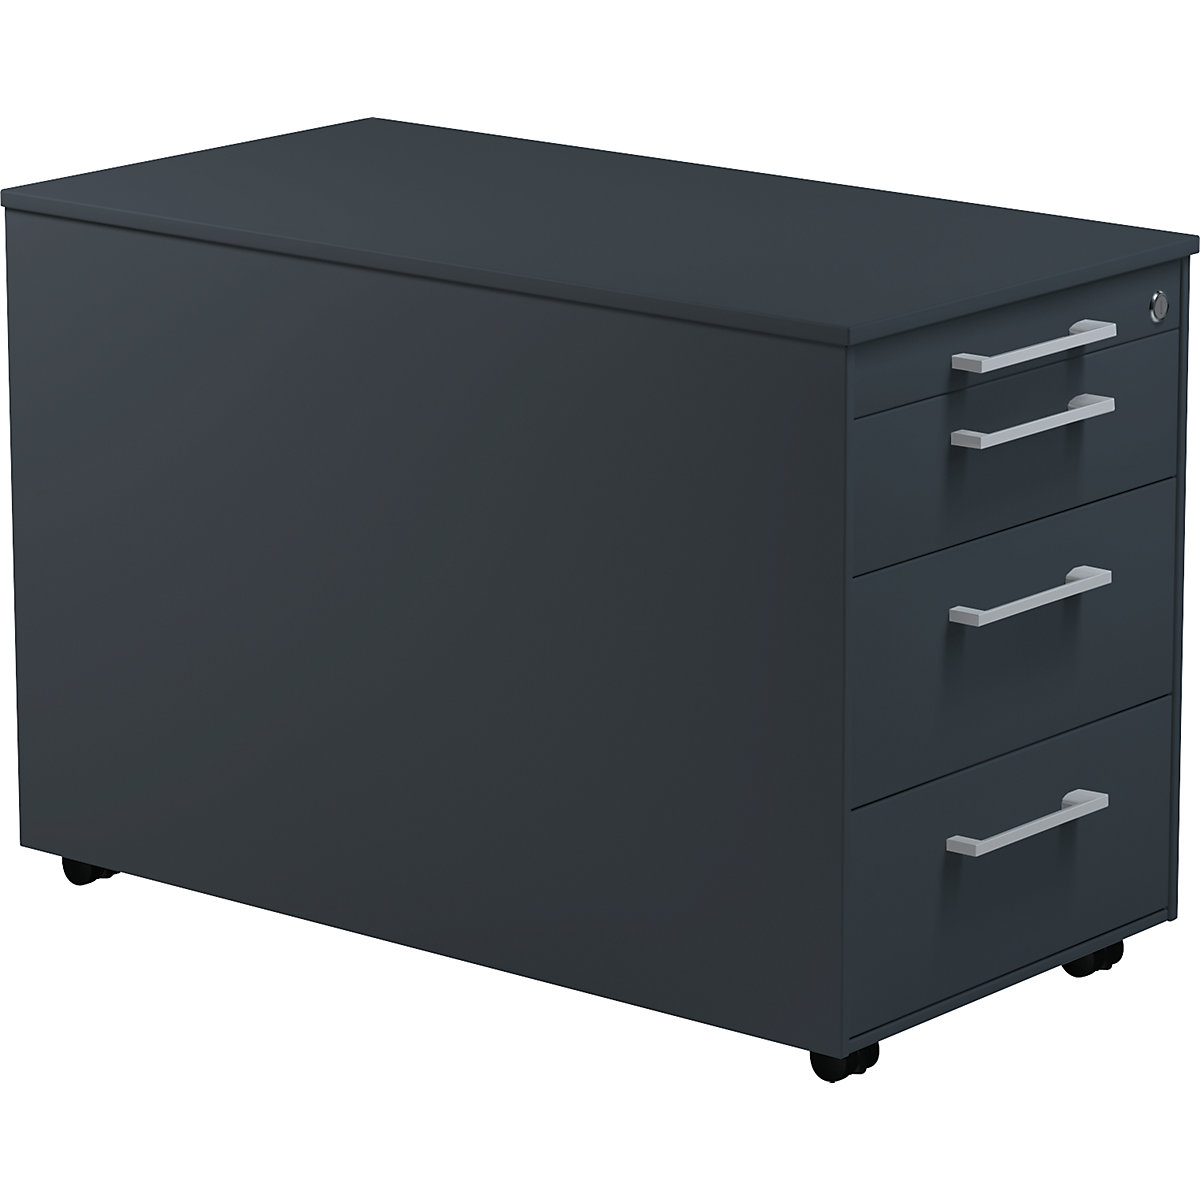 Mobile pedestal on castors – mauser, HxD 520 x 800 mm, 3 drawers, charcoal / charcoal / charcoal-2